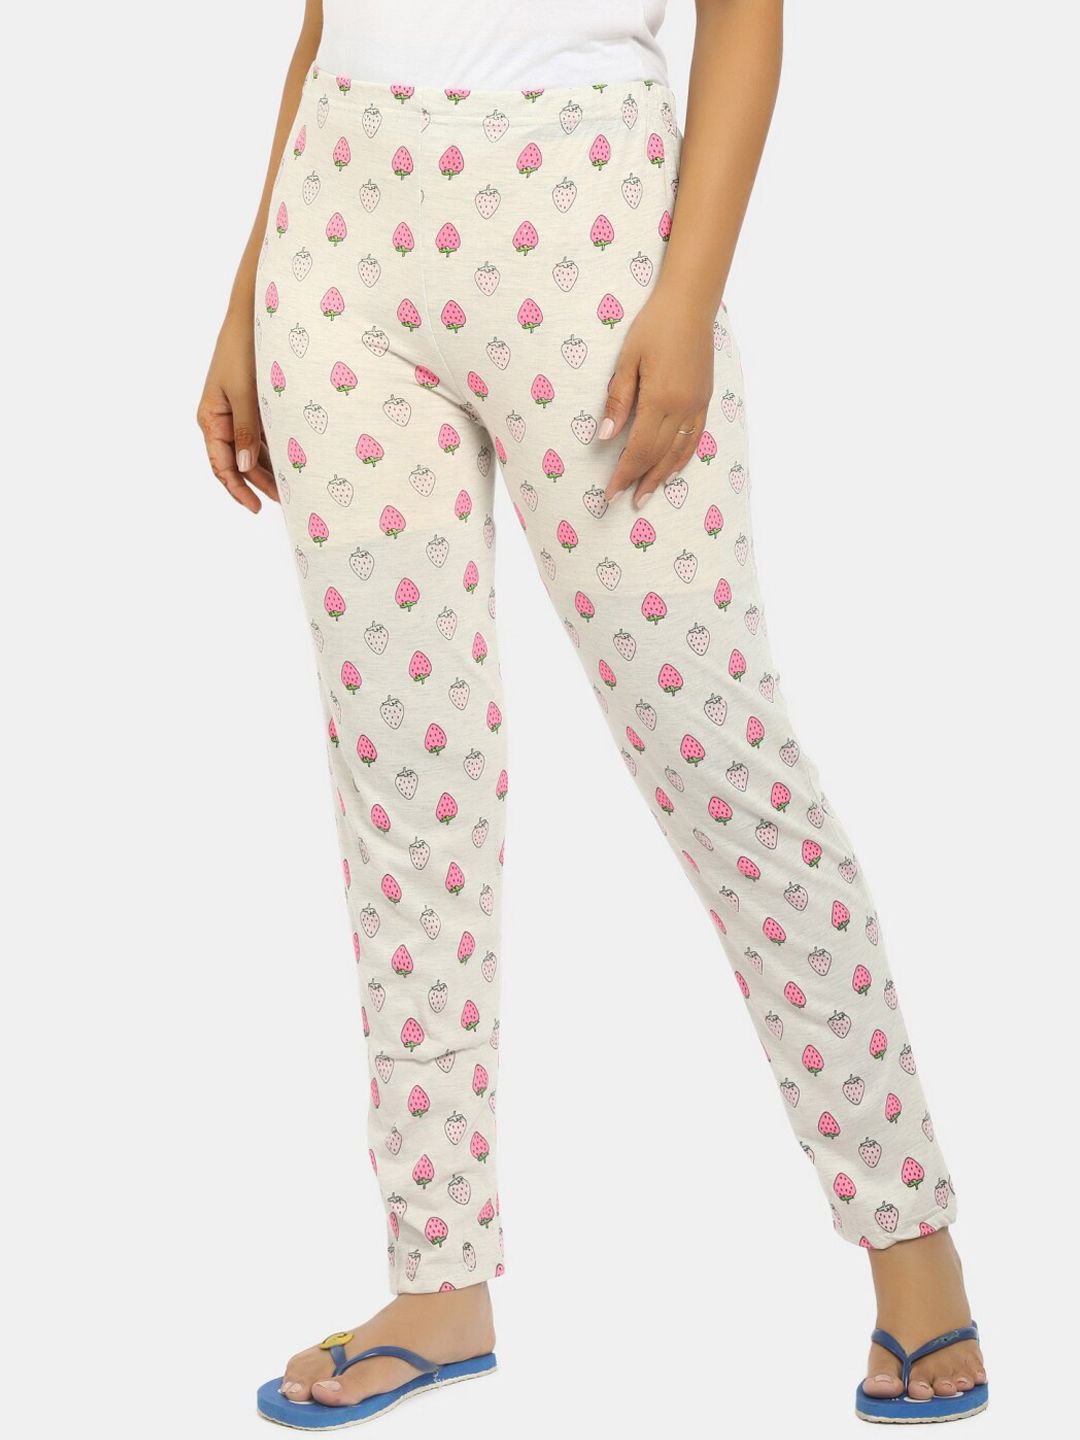 V-Mart Women Beige & Pink Printed Poly Cotton Lounge Pants Price in India